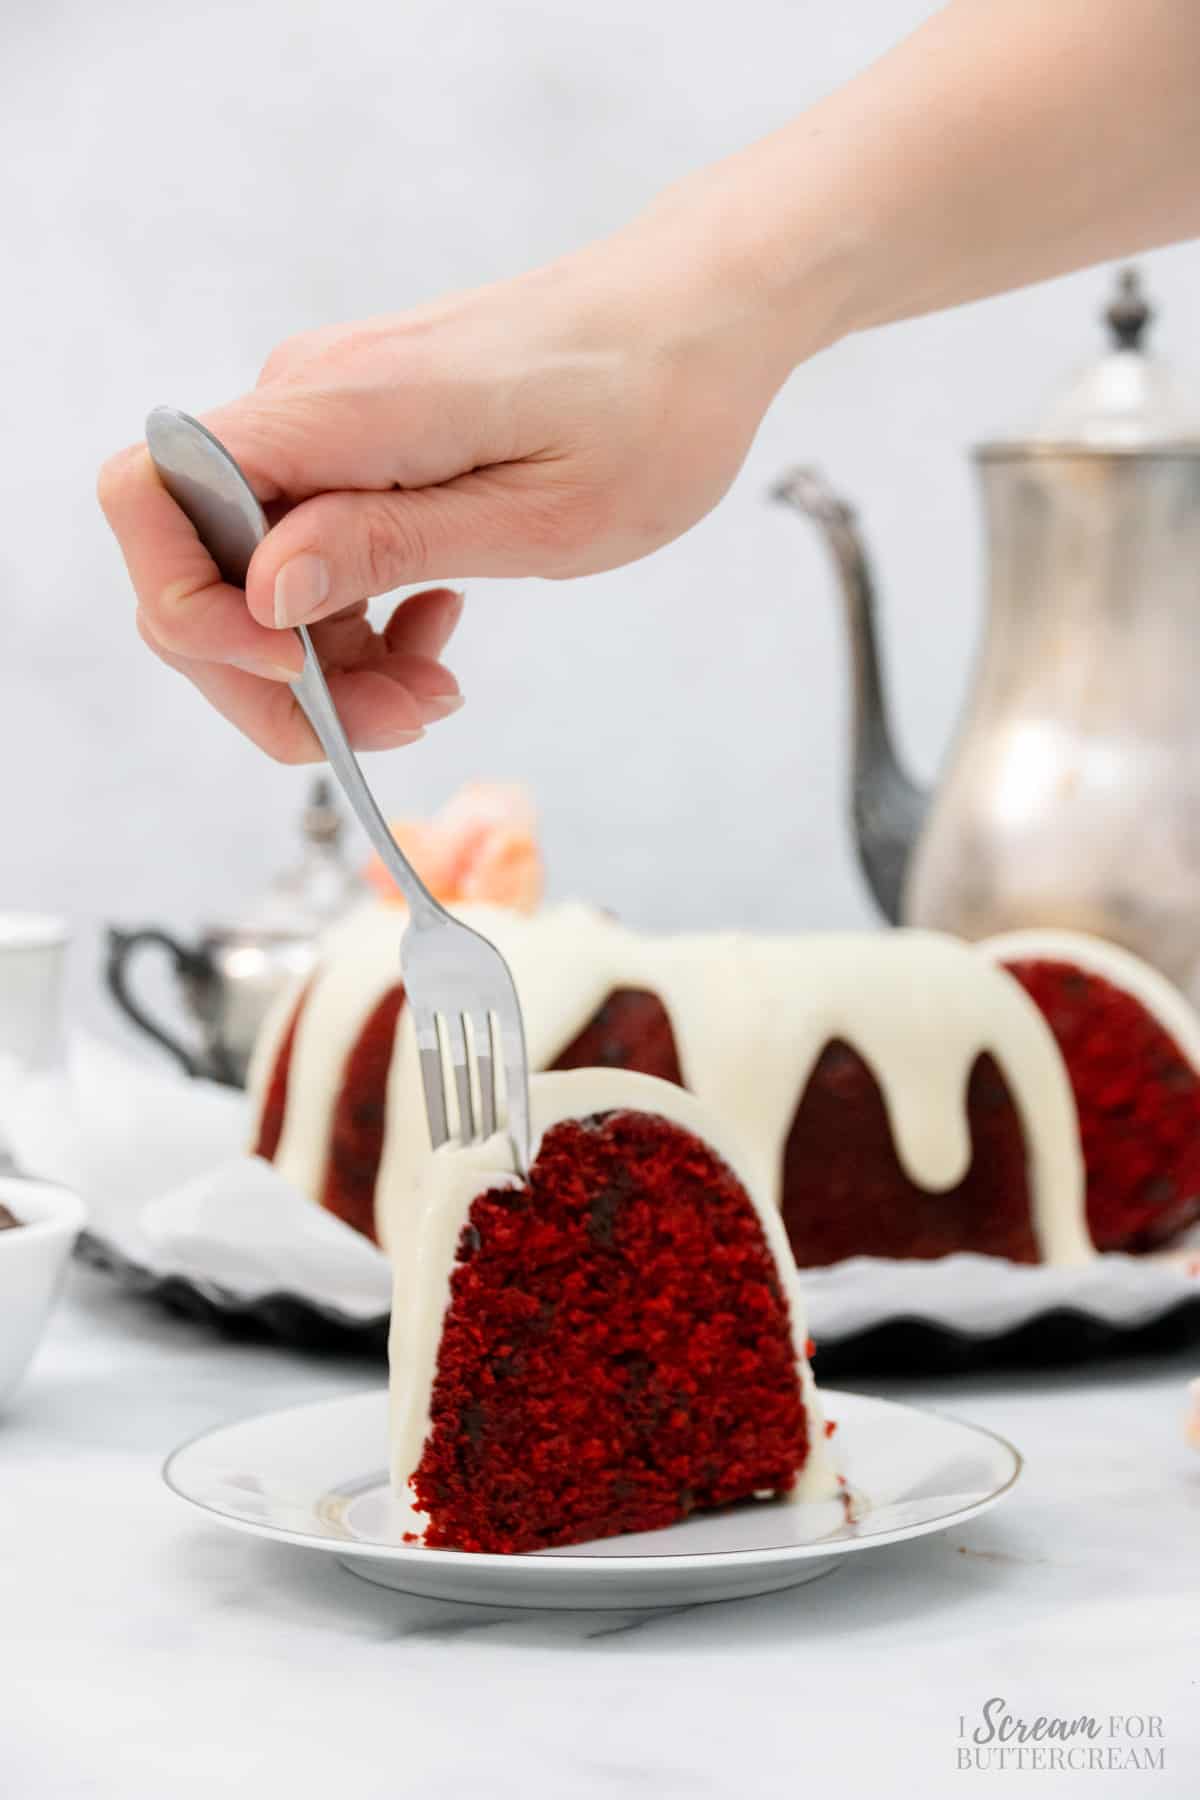 Cake slice on a plate with a fork.